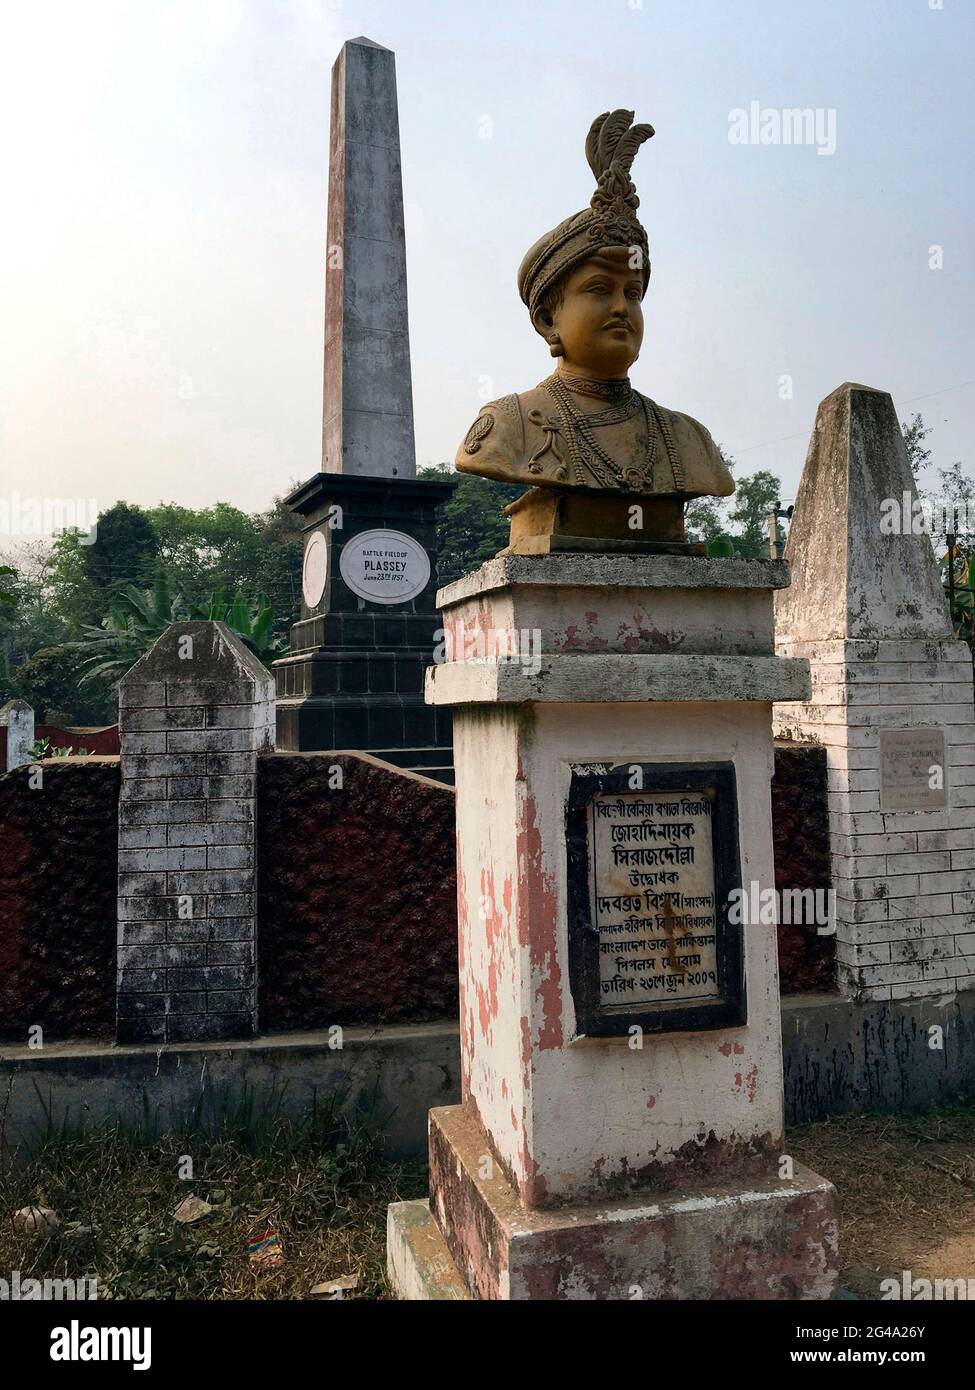 Monument to the Battle of Plassey victory of the British East India Company over the Nawab of Bengal and his French allies on 23 June 1757, under the leadership of Robert Clive Stock Photo